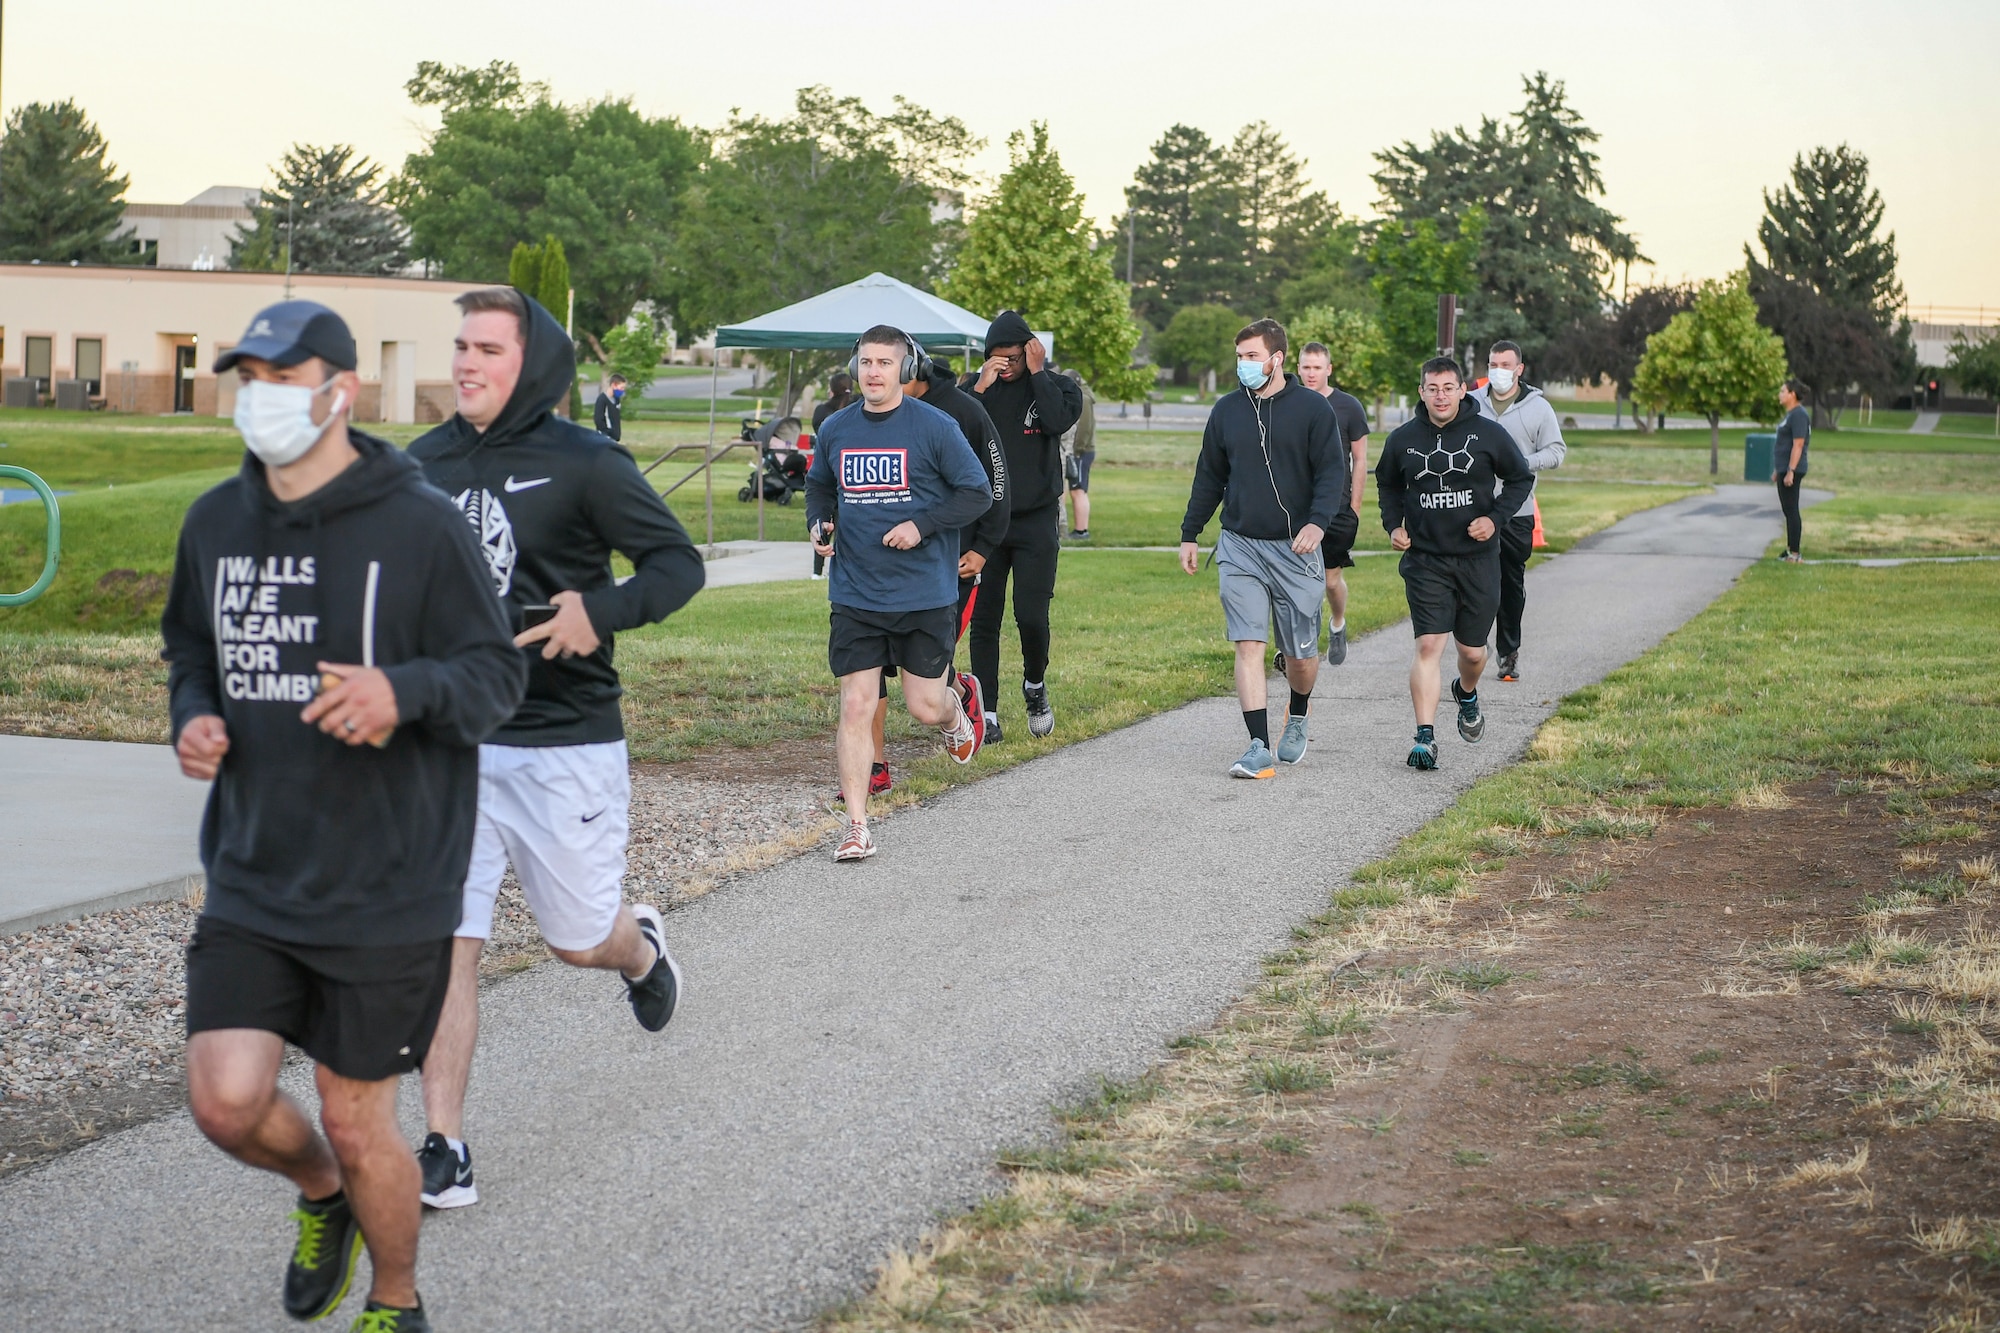 Military and civilian Airmen and their families participate in a Unity 5K run/walk.